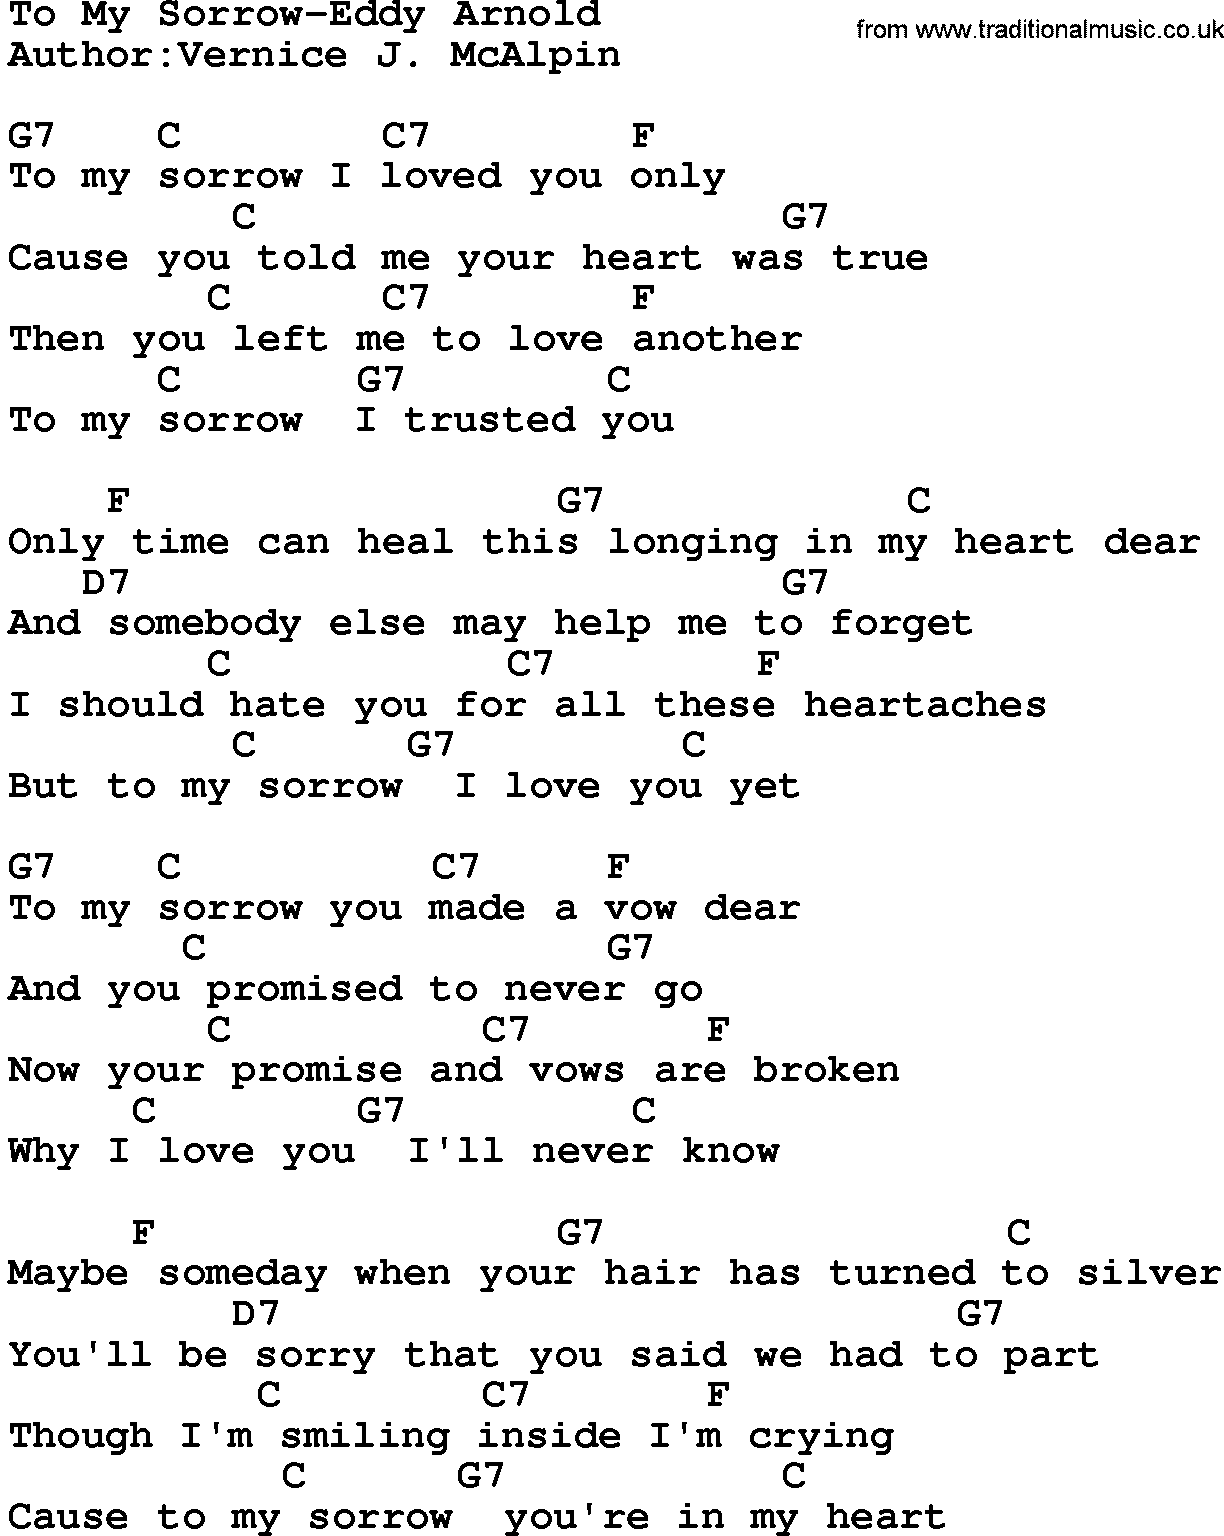 Country music song: To My Sorrow-Eddy Arnold lyrics and chords